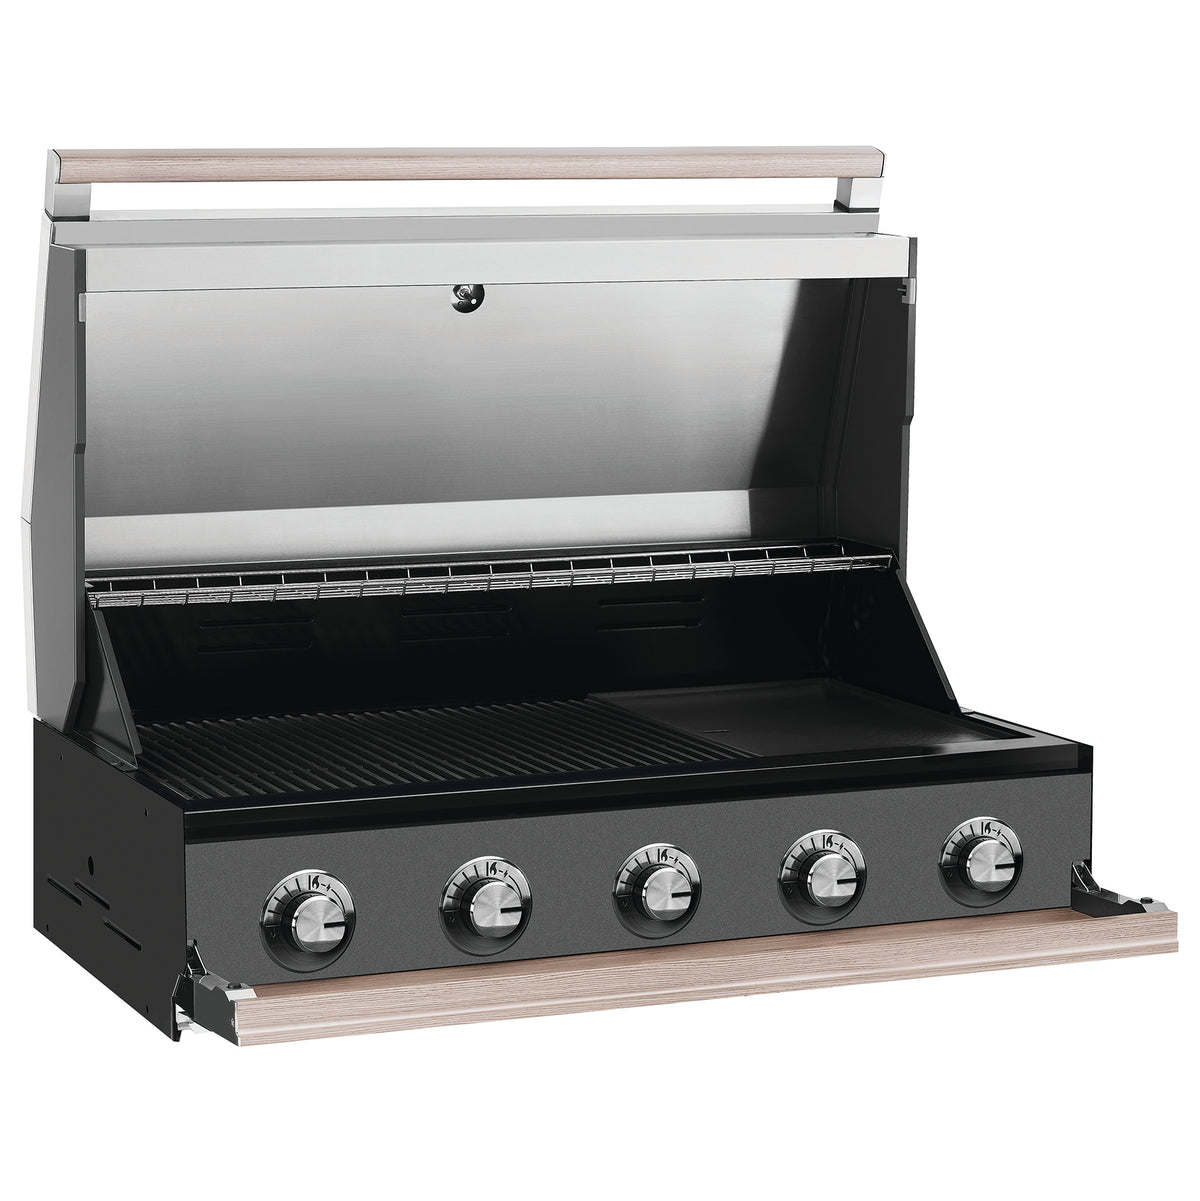 BeefEater 1500 Series 5 Burner Build-in Gas Barbecue